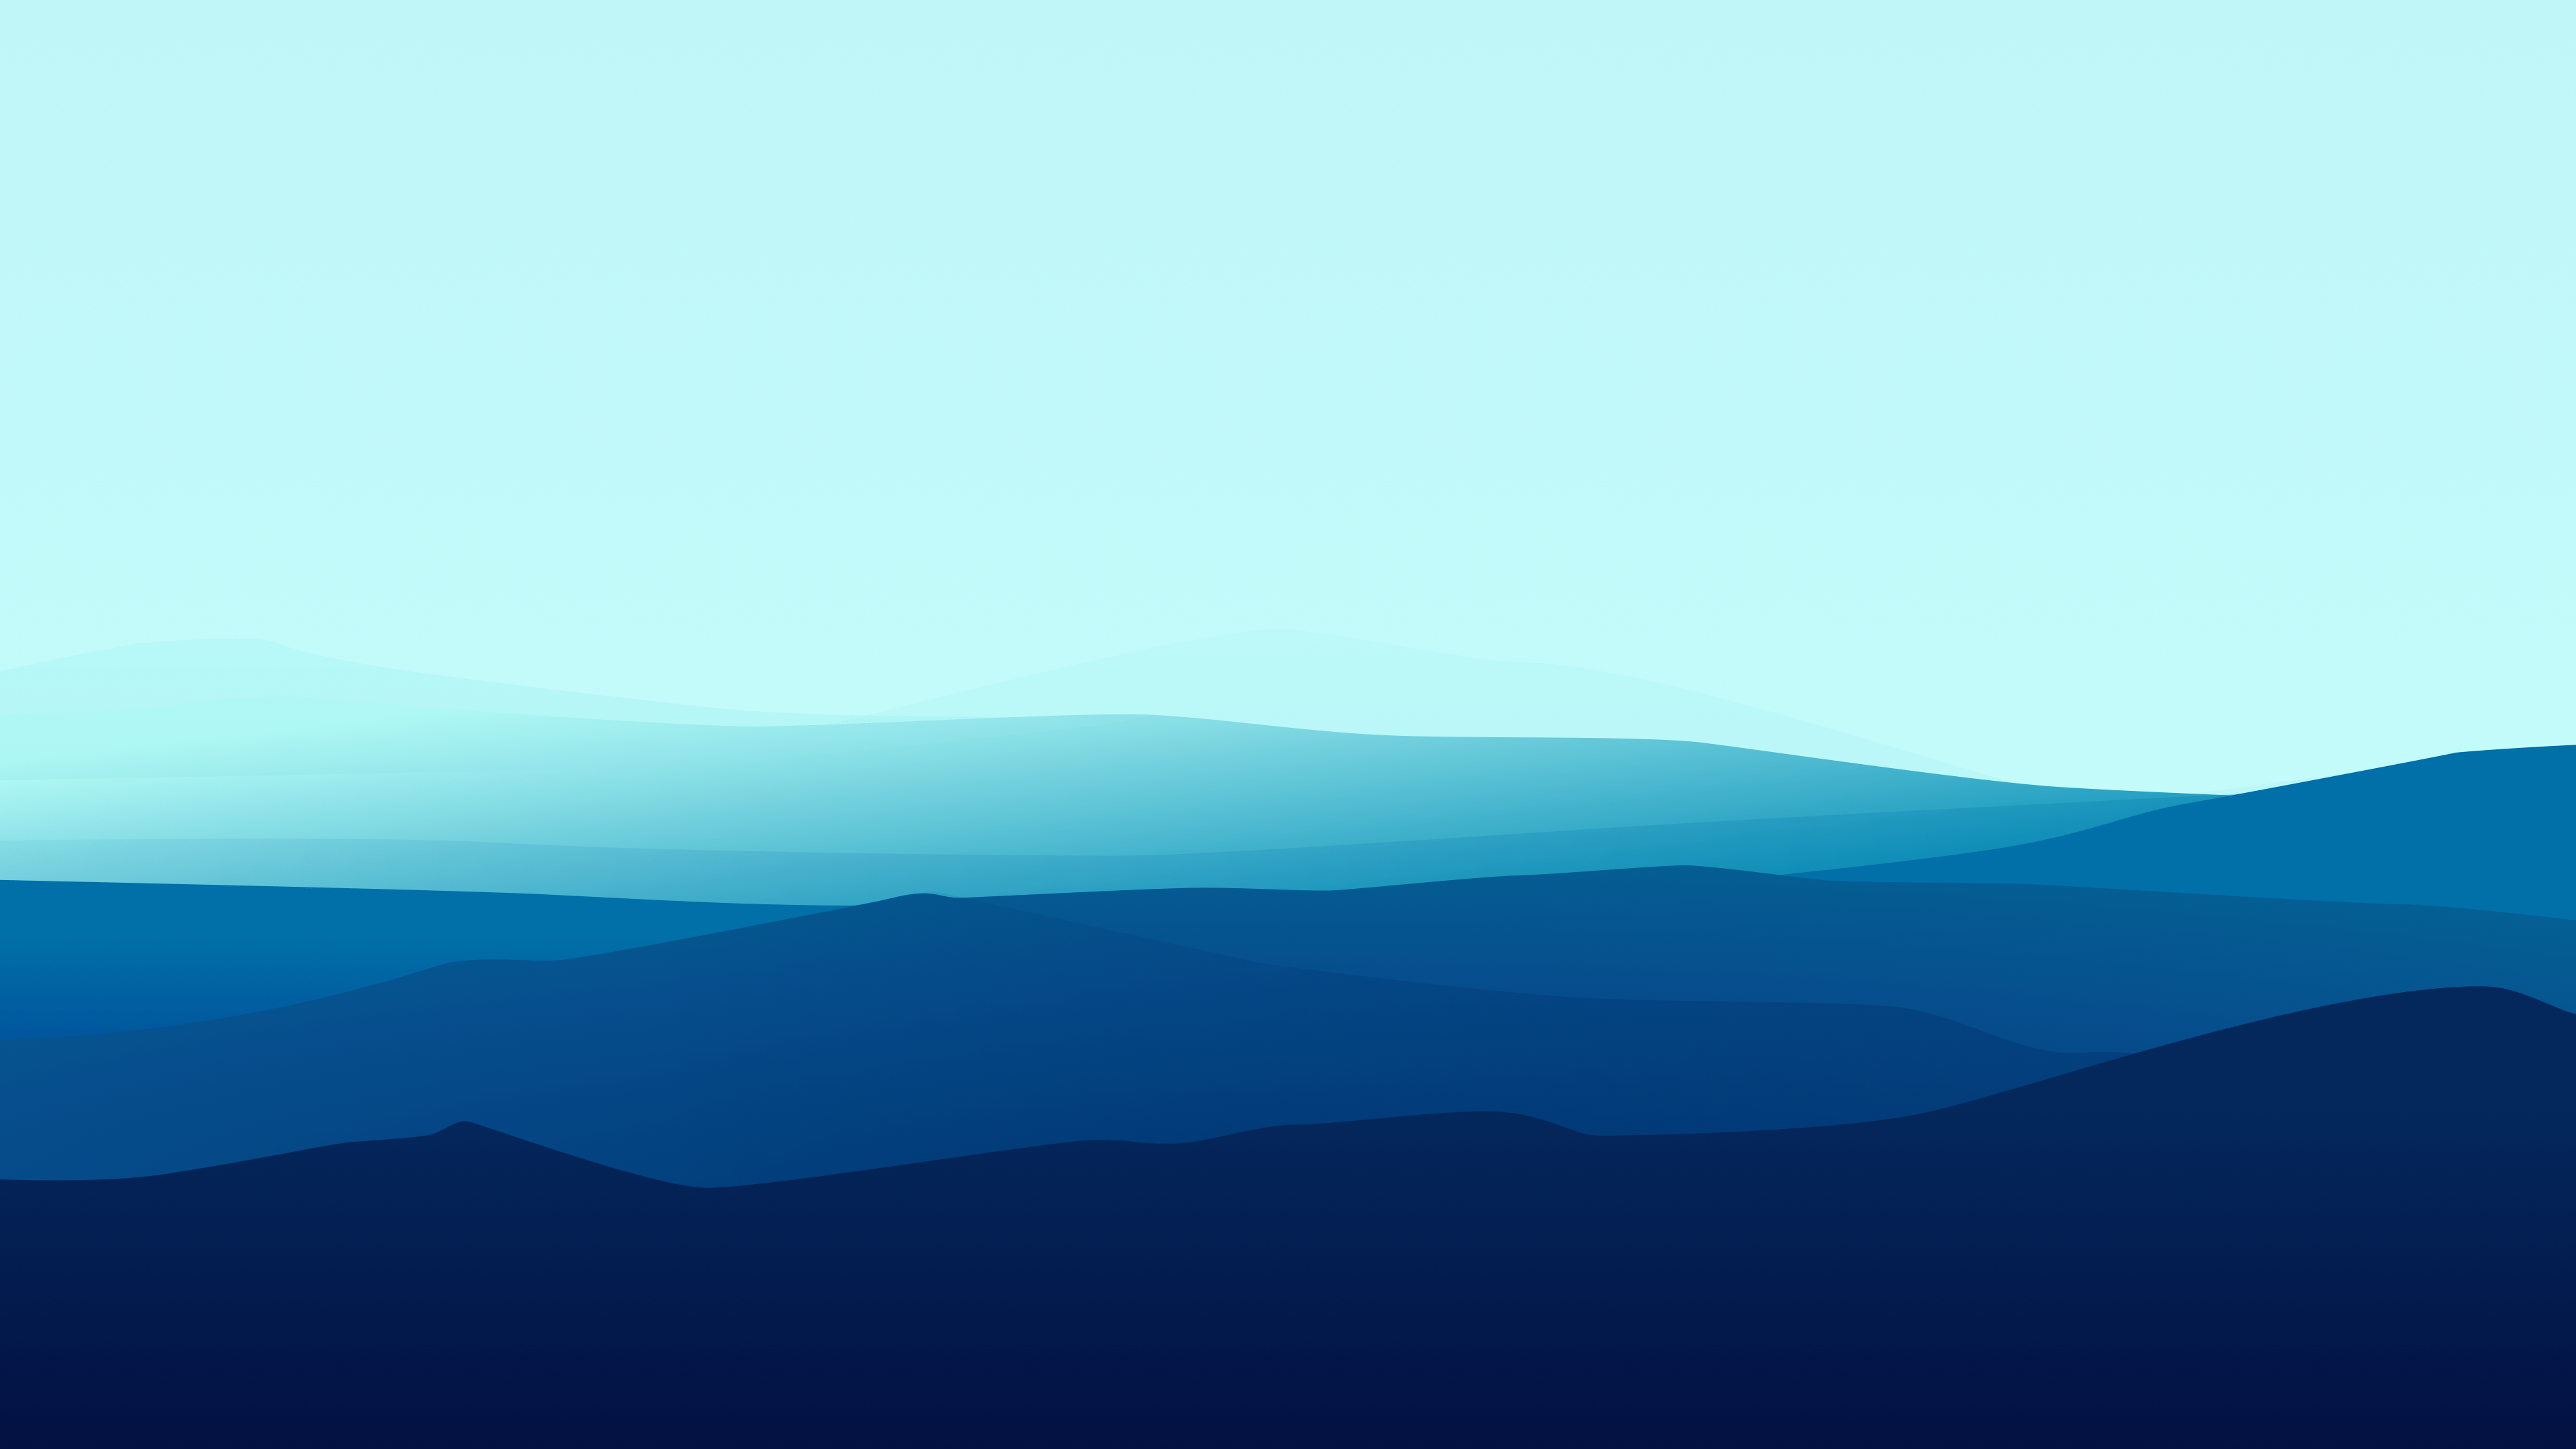 Calm Minimalist Wallpapers - Top Free Calm Minimalist Backgrounds